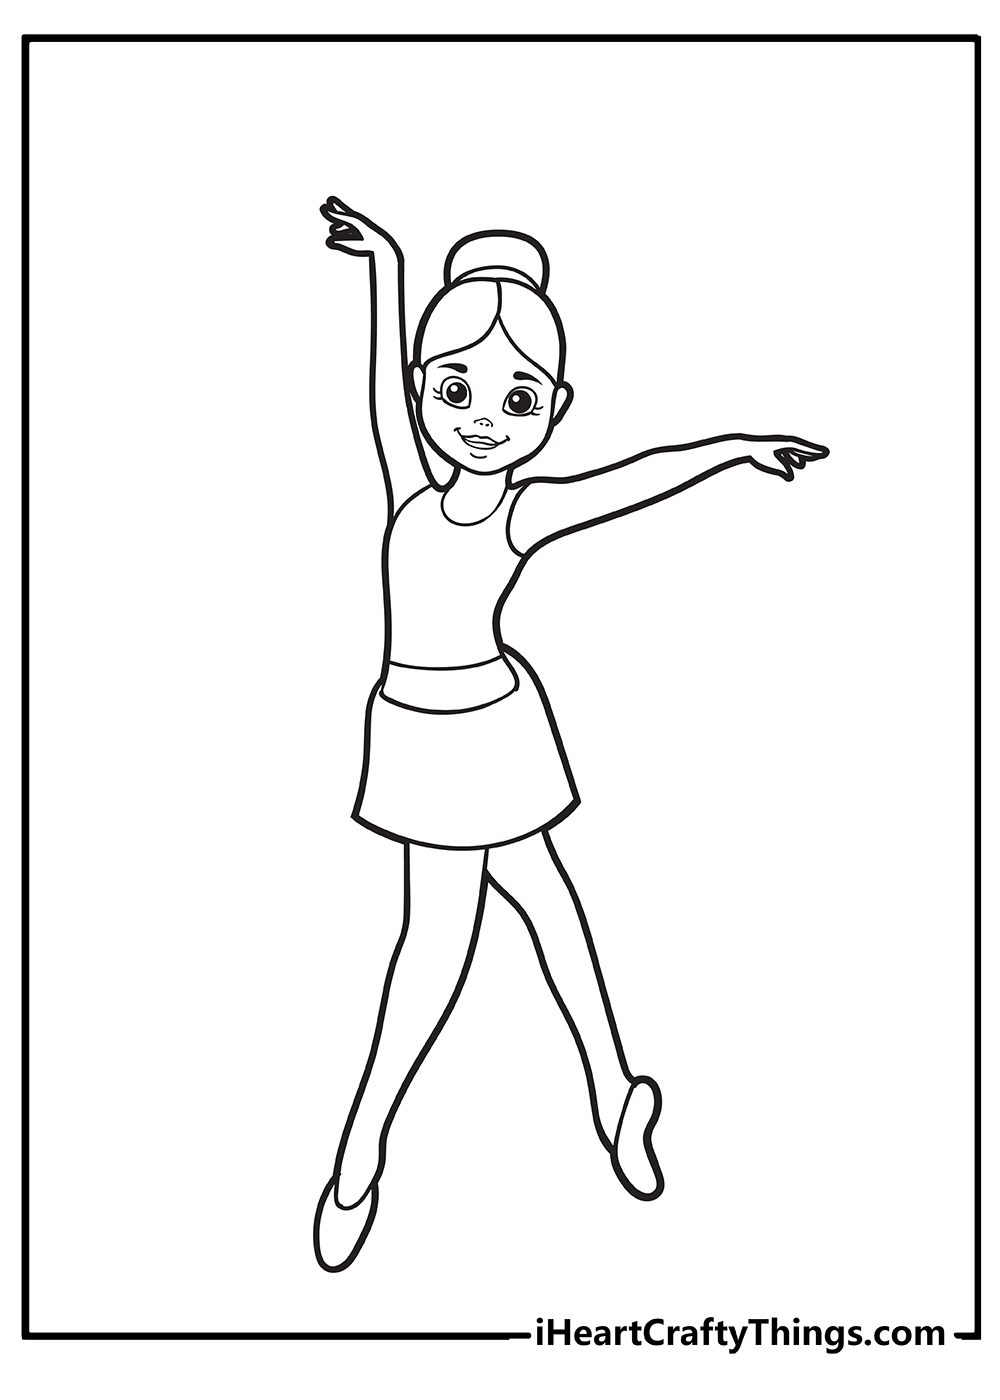 Ballerina Coloring Pages free download for kids